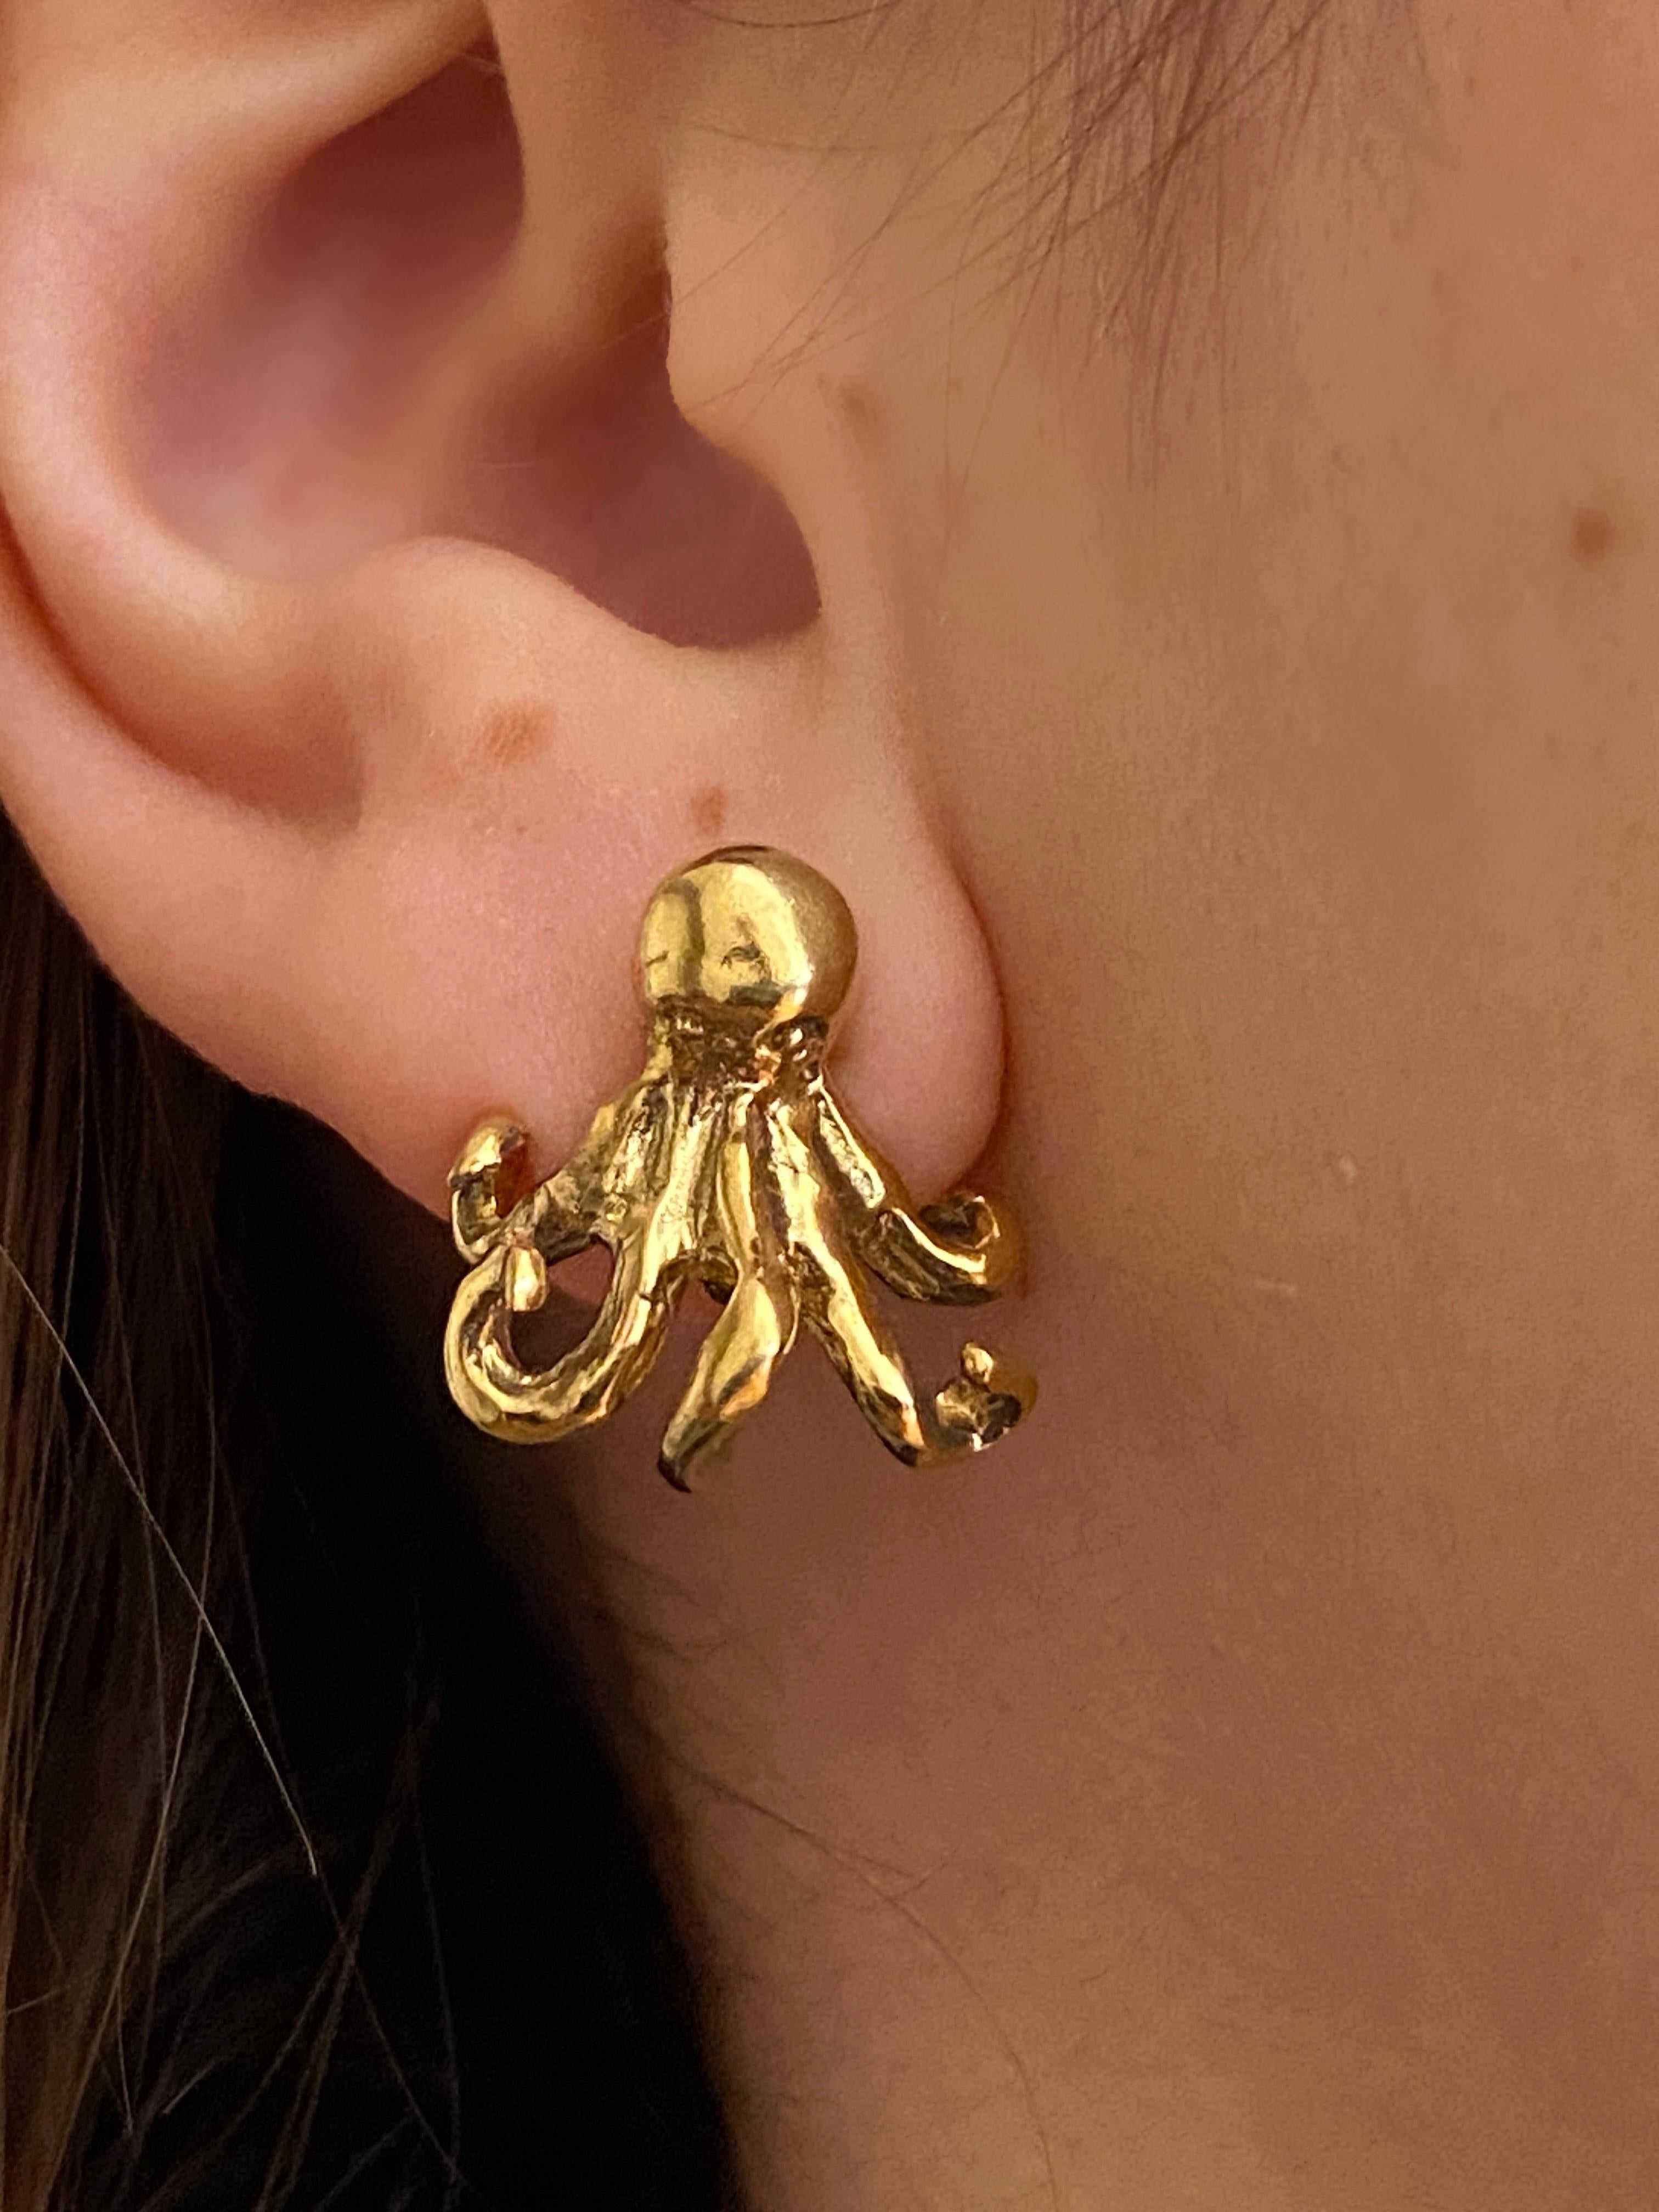 Artisan Rossella Ugolini 18K Yellow Gold Handcrafted Octopus Stud Earrings For Sale